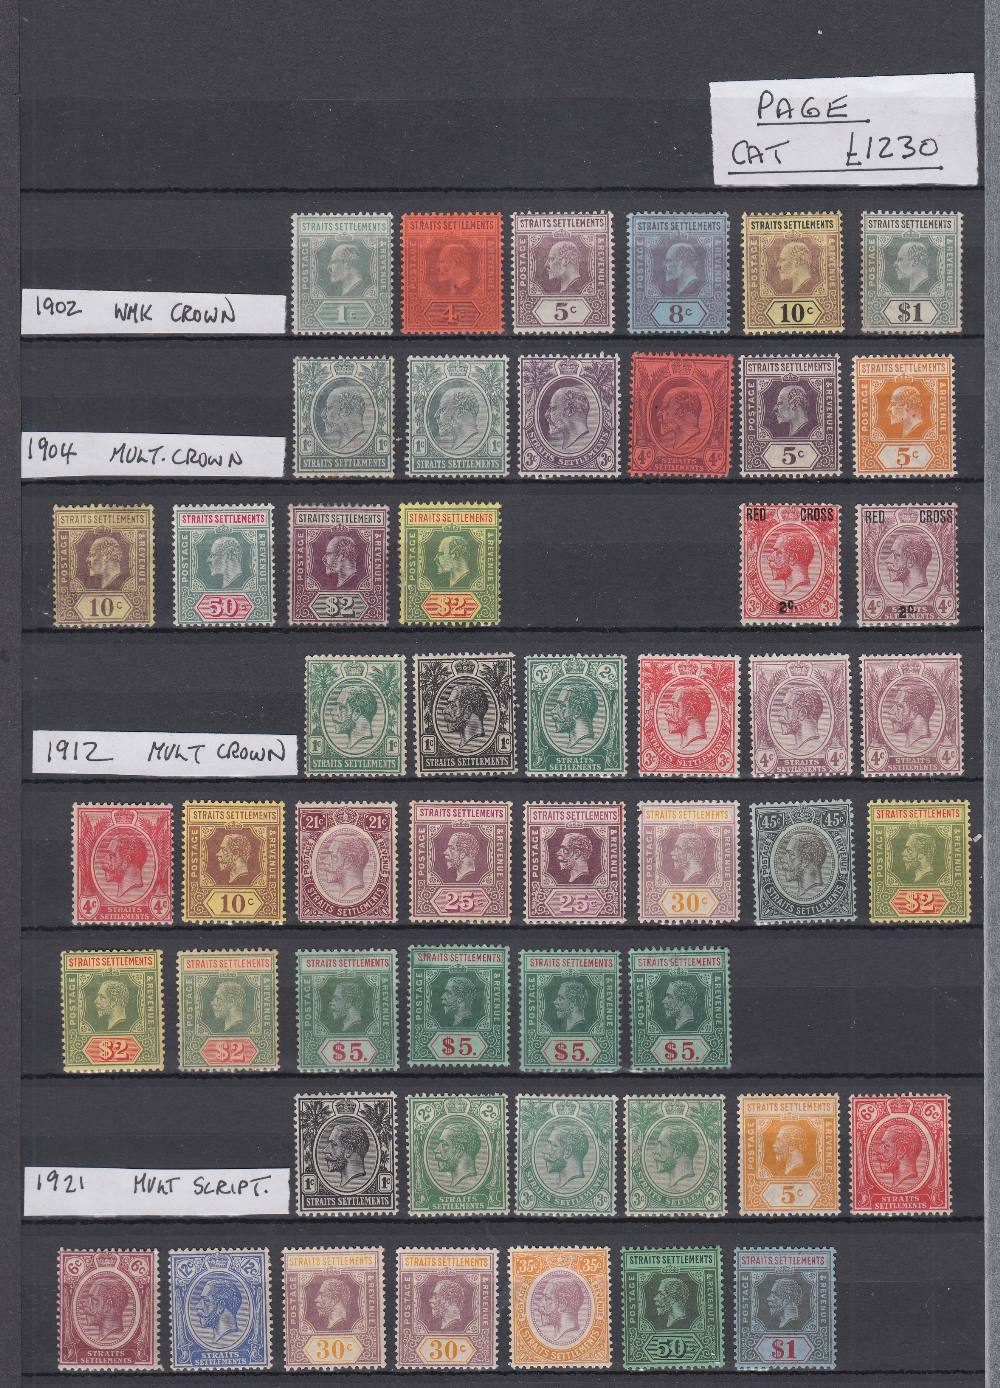 STAMPS BRITISH COMMONWEALTH mint and used in burgandy stockbook, Malaya, India all pre QEII. - Image 2 of 6